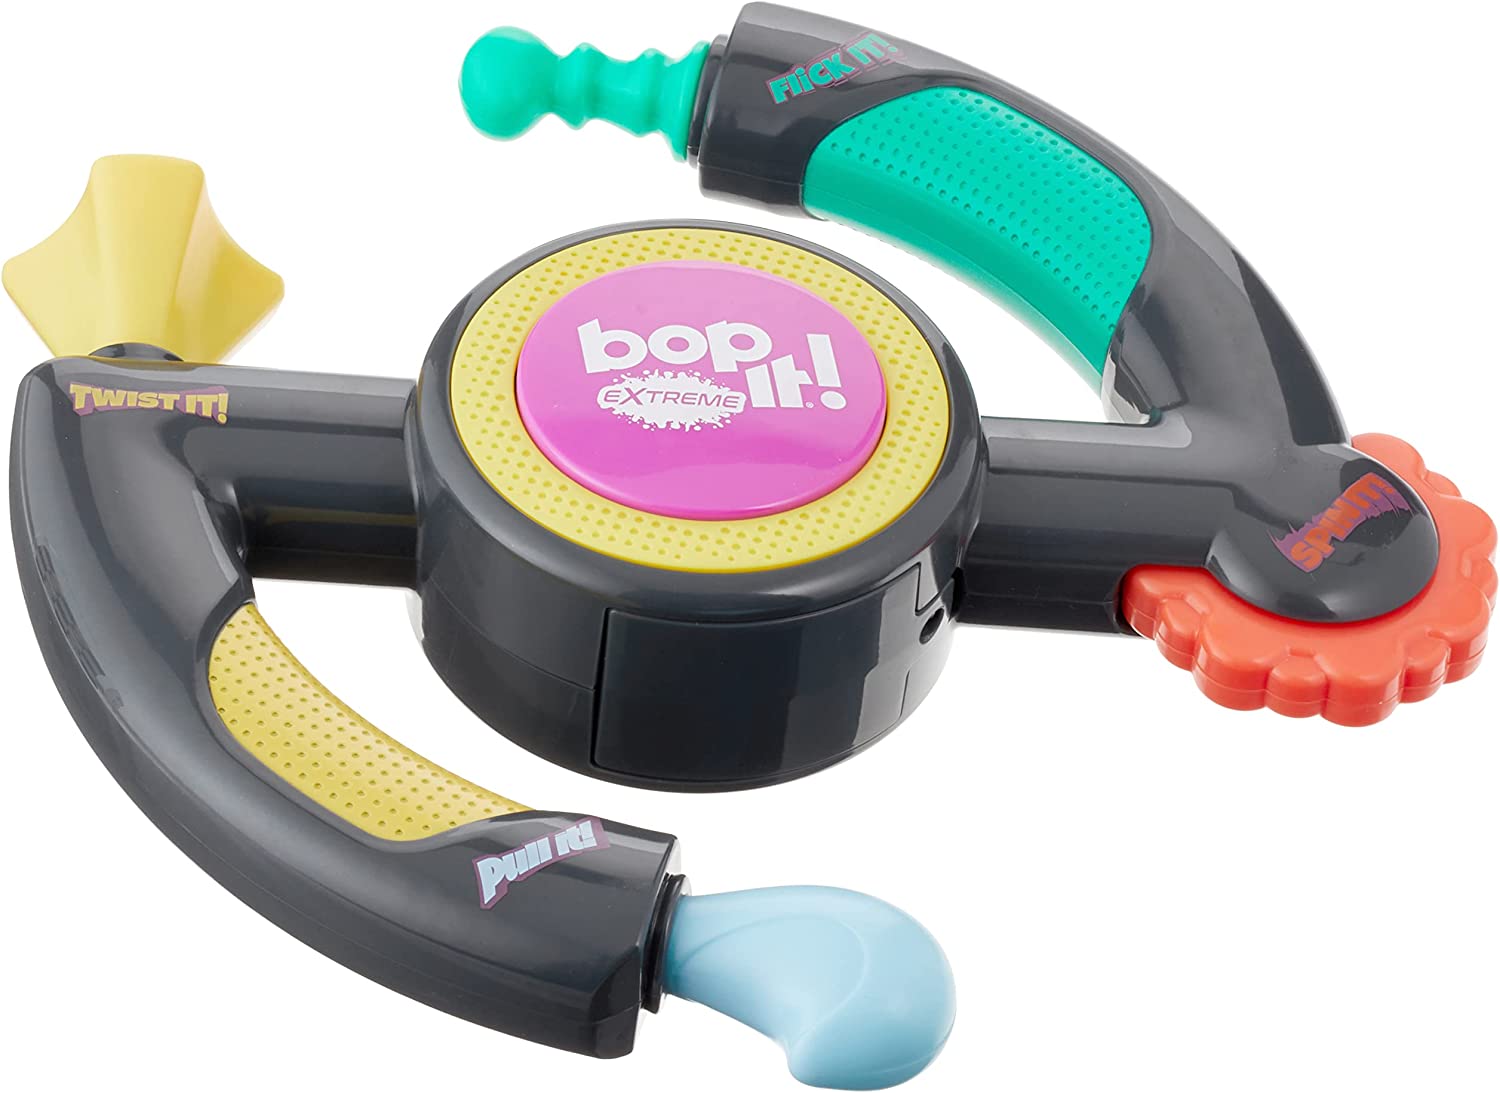 Hasbro Bop It! Extreme Electronic Game for 1 or More Players, Fun Party Game for Kids Ages 8+, 4 Modes Including One-On-One Mode, Interactive audible Game great for players who are blind or low vision.